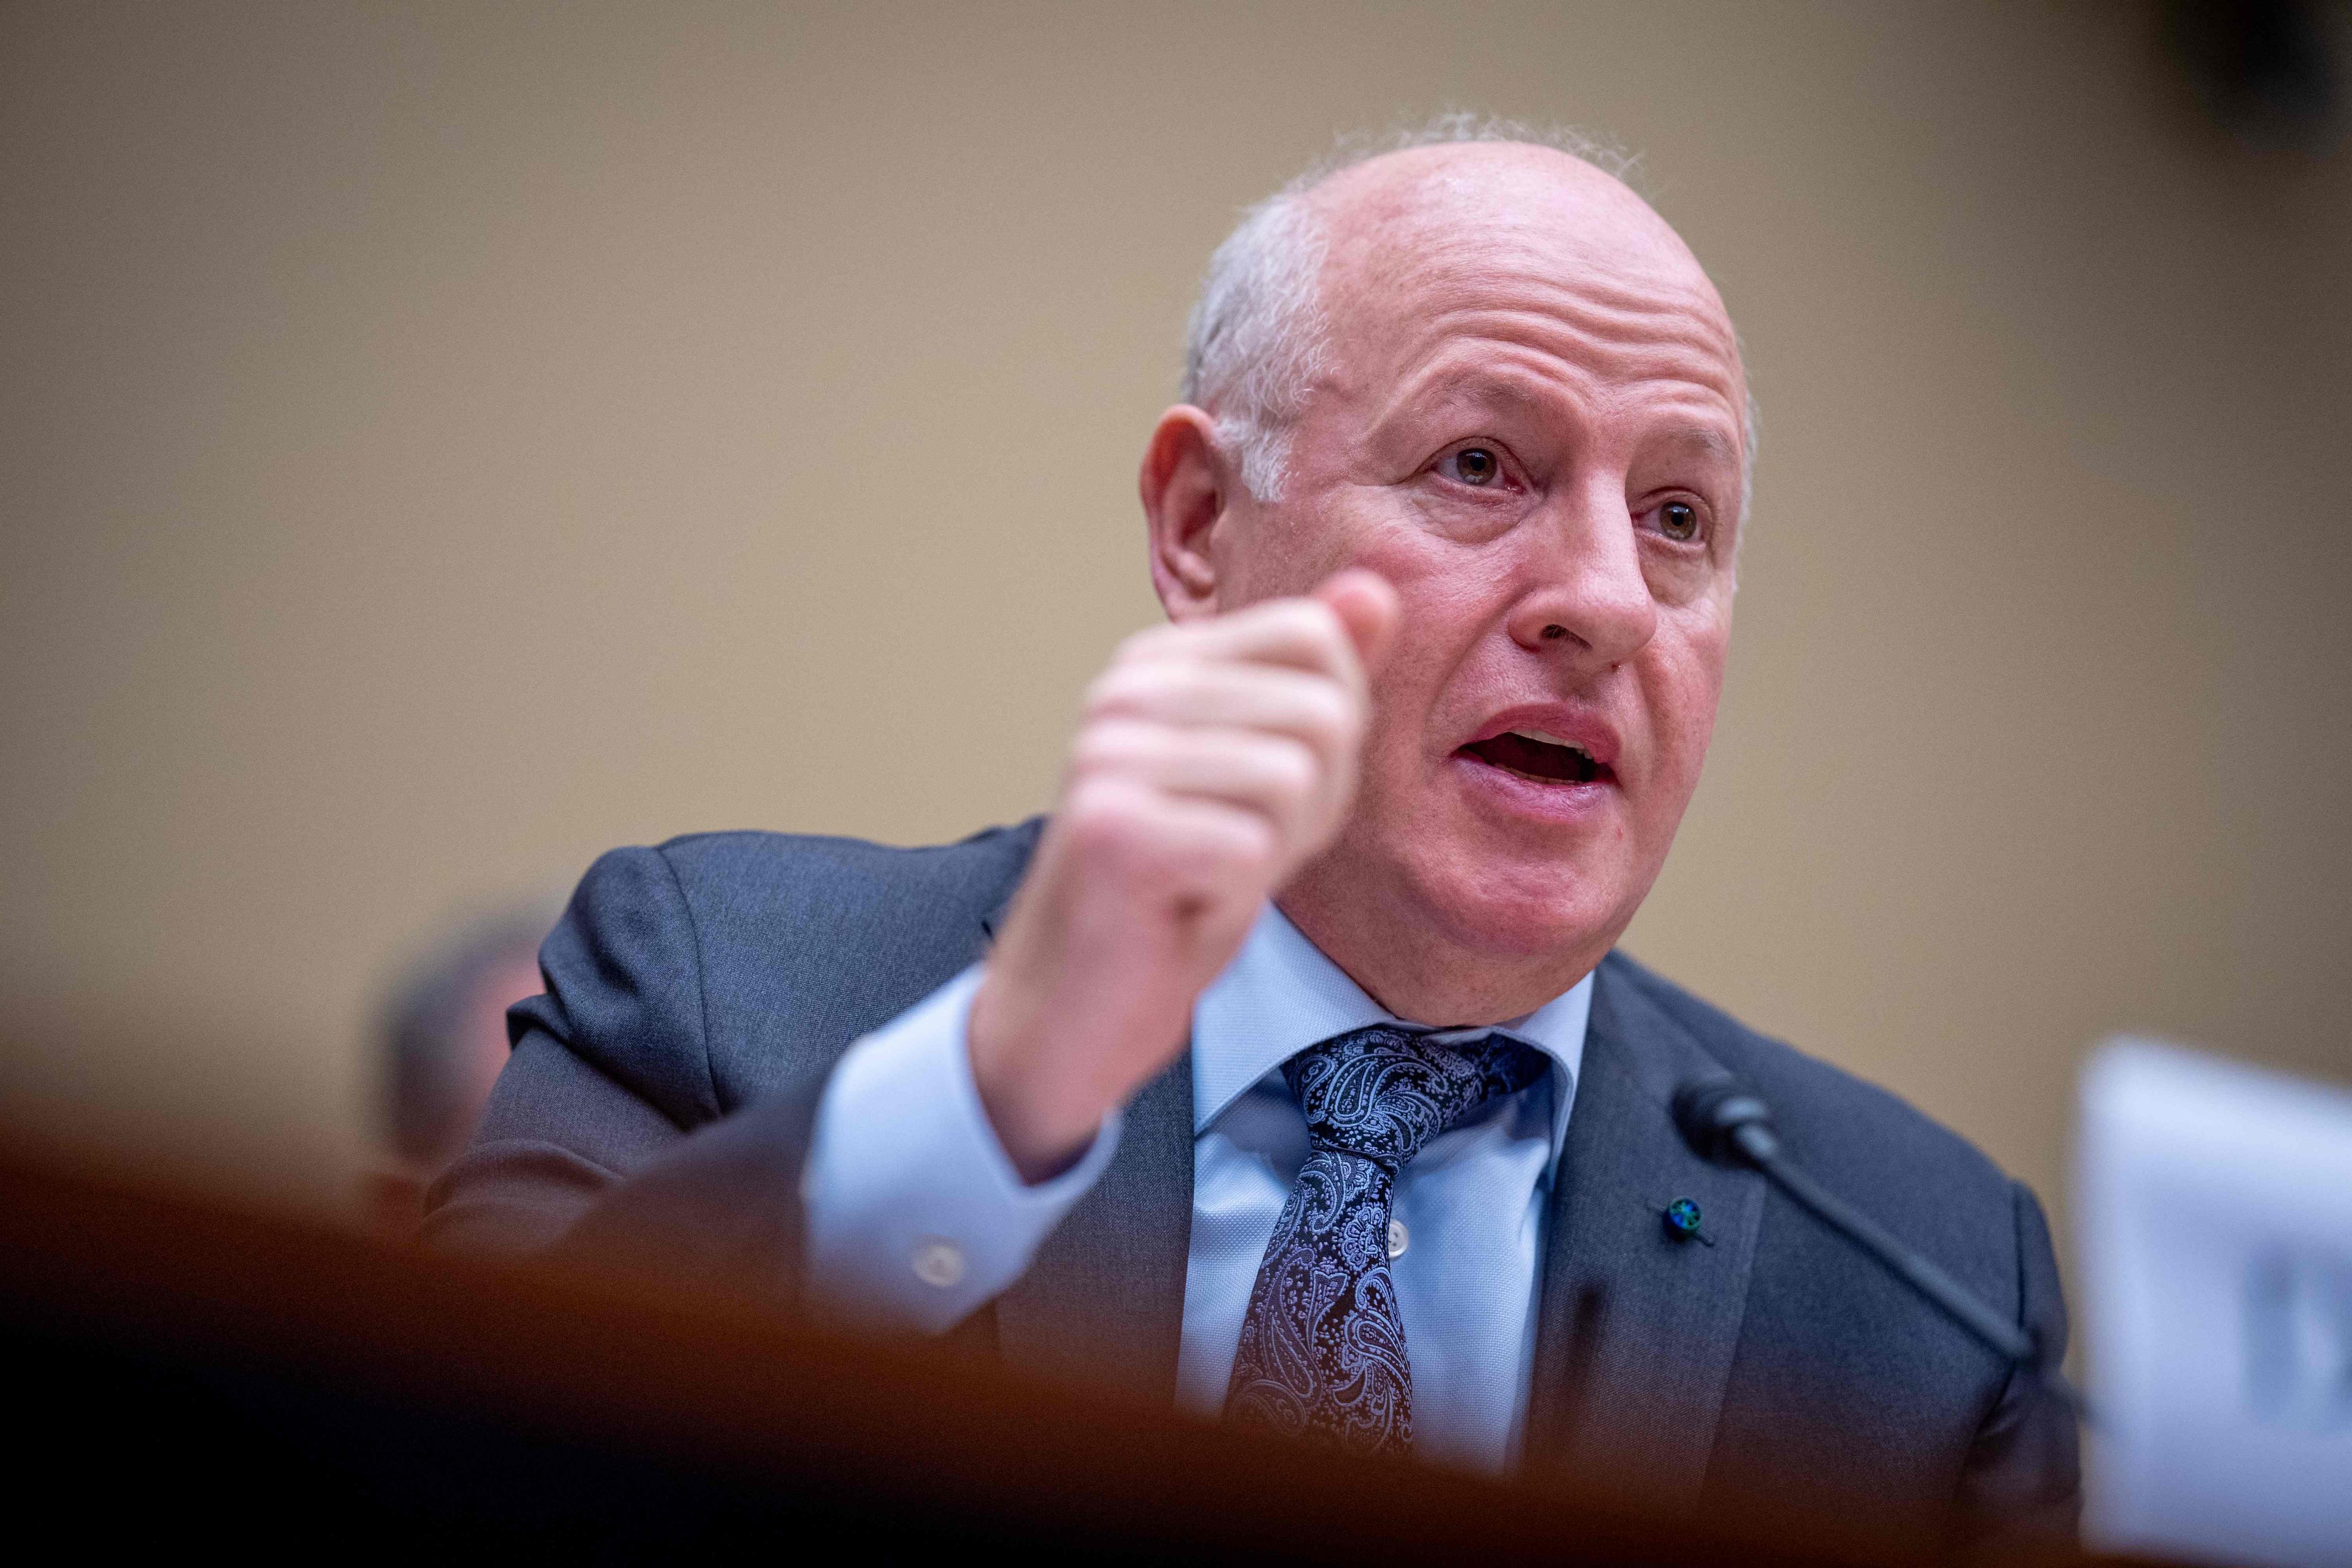 Peter Daszak, president of New York-based EcoHealth Alliance, speaks during a US House select subcommittee hearing on the coronavirus pandemic on Capitol Hill in Washington on May 1. Photo: Getty Images via AFP